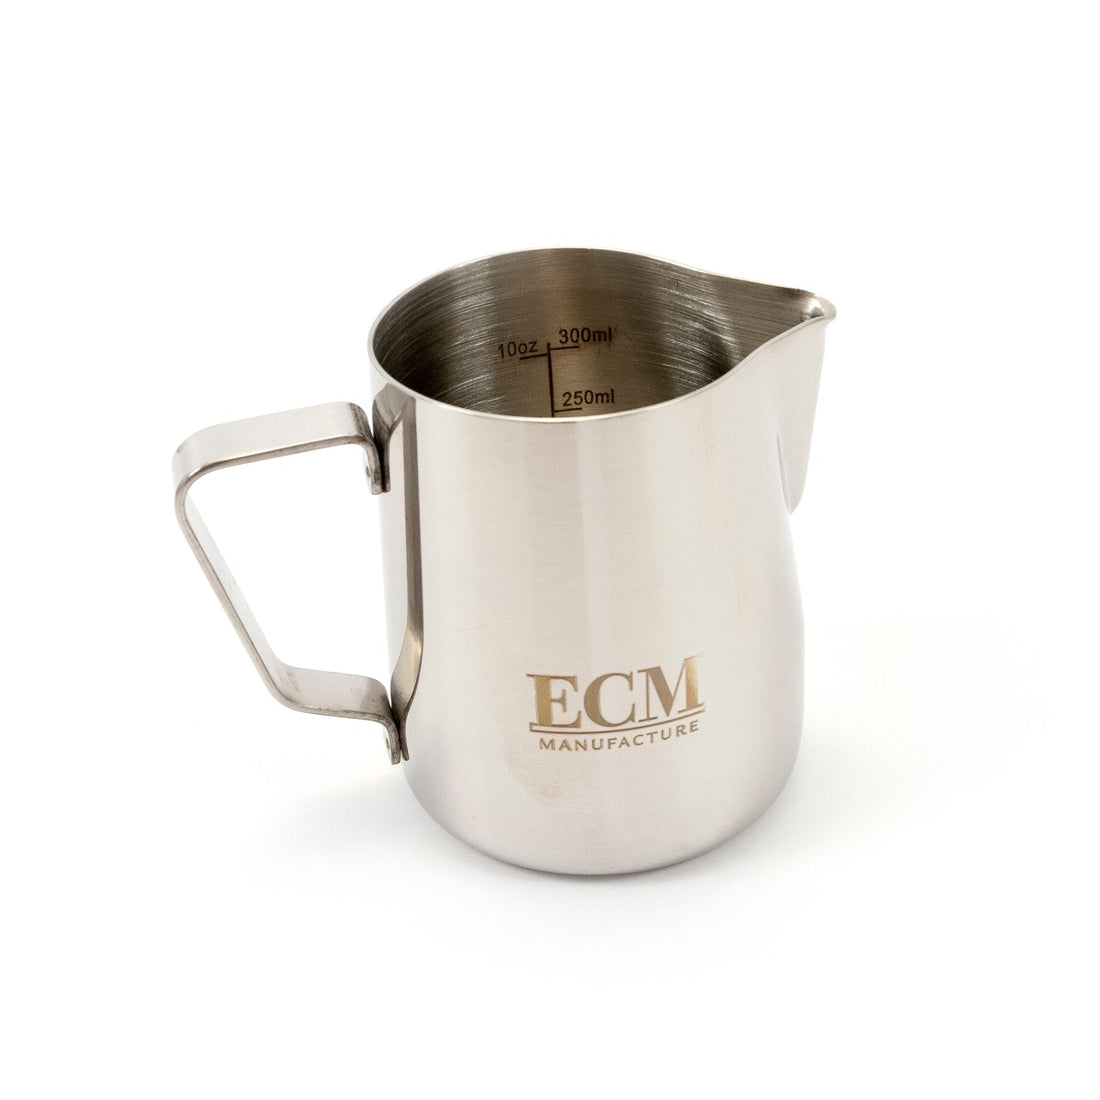 12 oz Stainless Steel Milk Frothing Pitcher